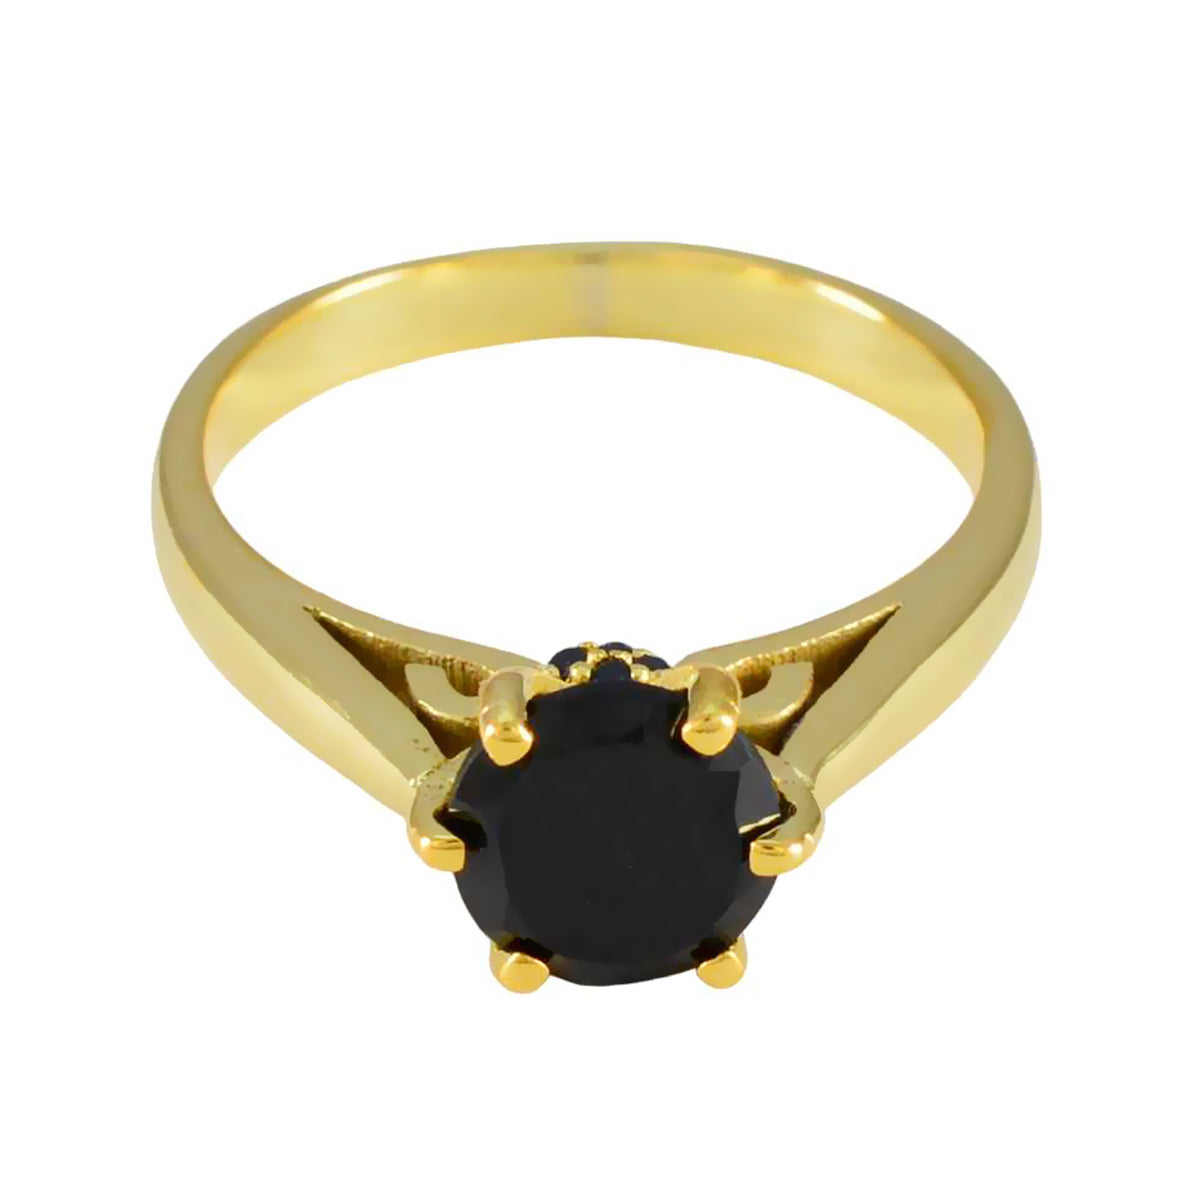 Riyo Extensive Silver Ring With Yellow Gold Plating Black Onyx Stone Round Shape Prong Setting Designer Jewelry Christmas Ring